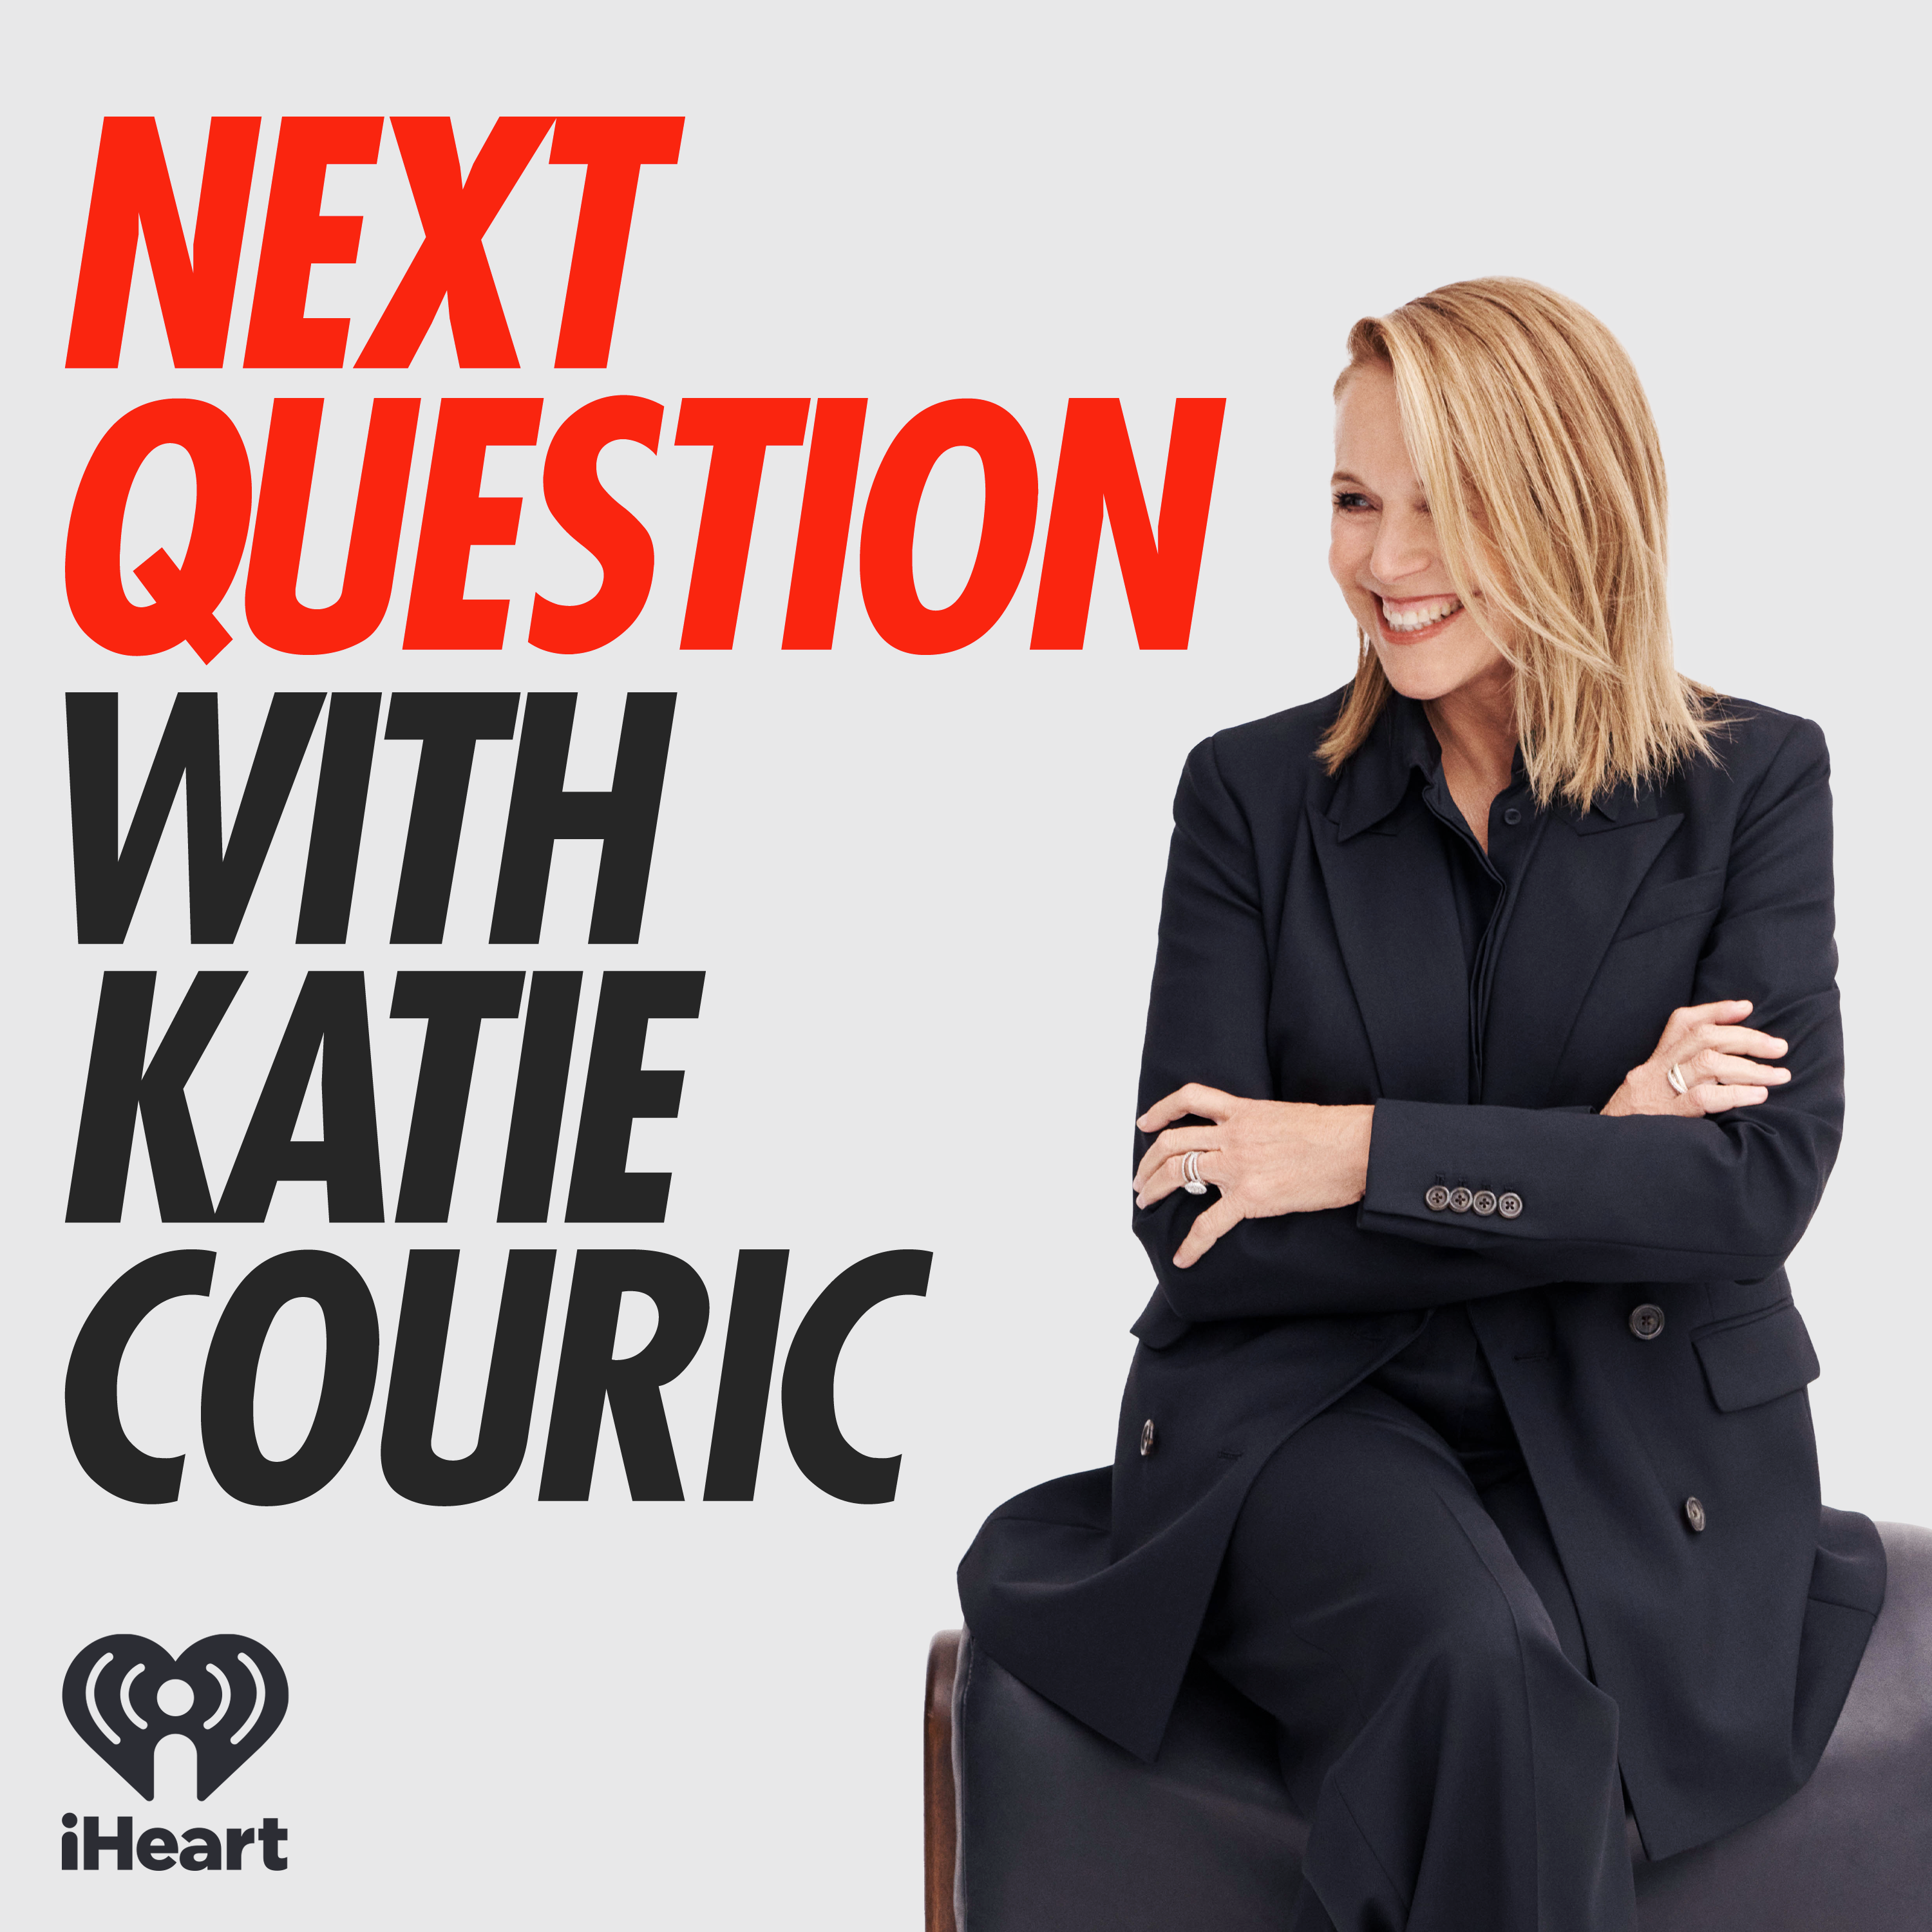 Get ready for season 3 of Next Question with Katie Couric!